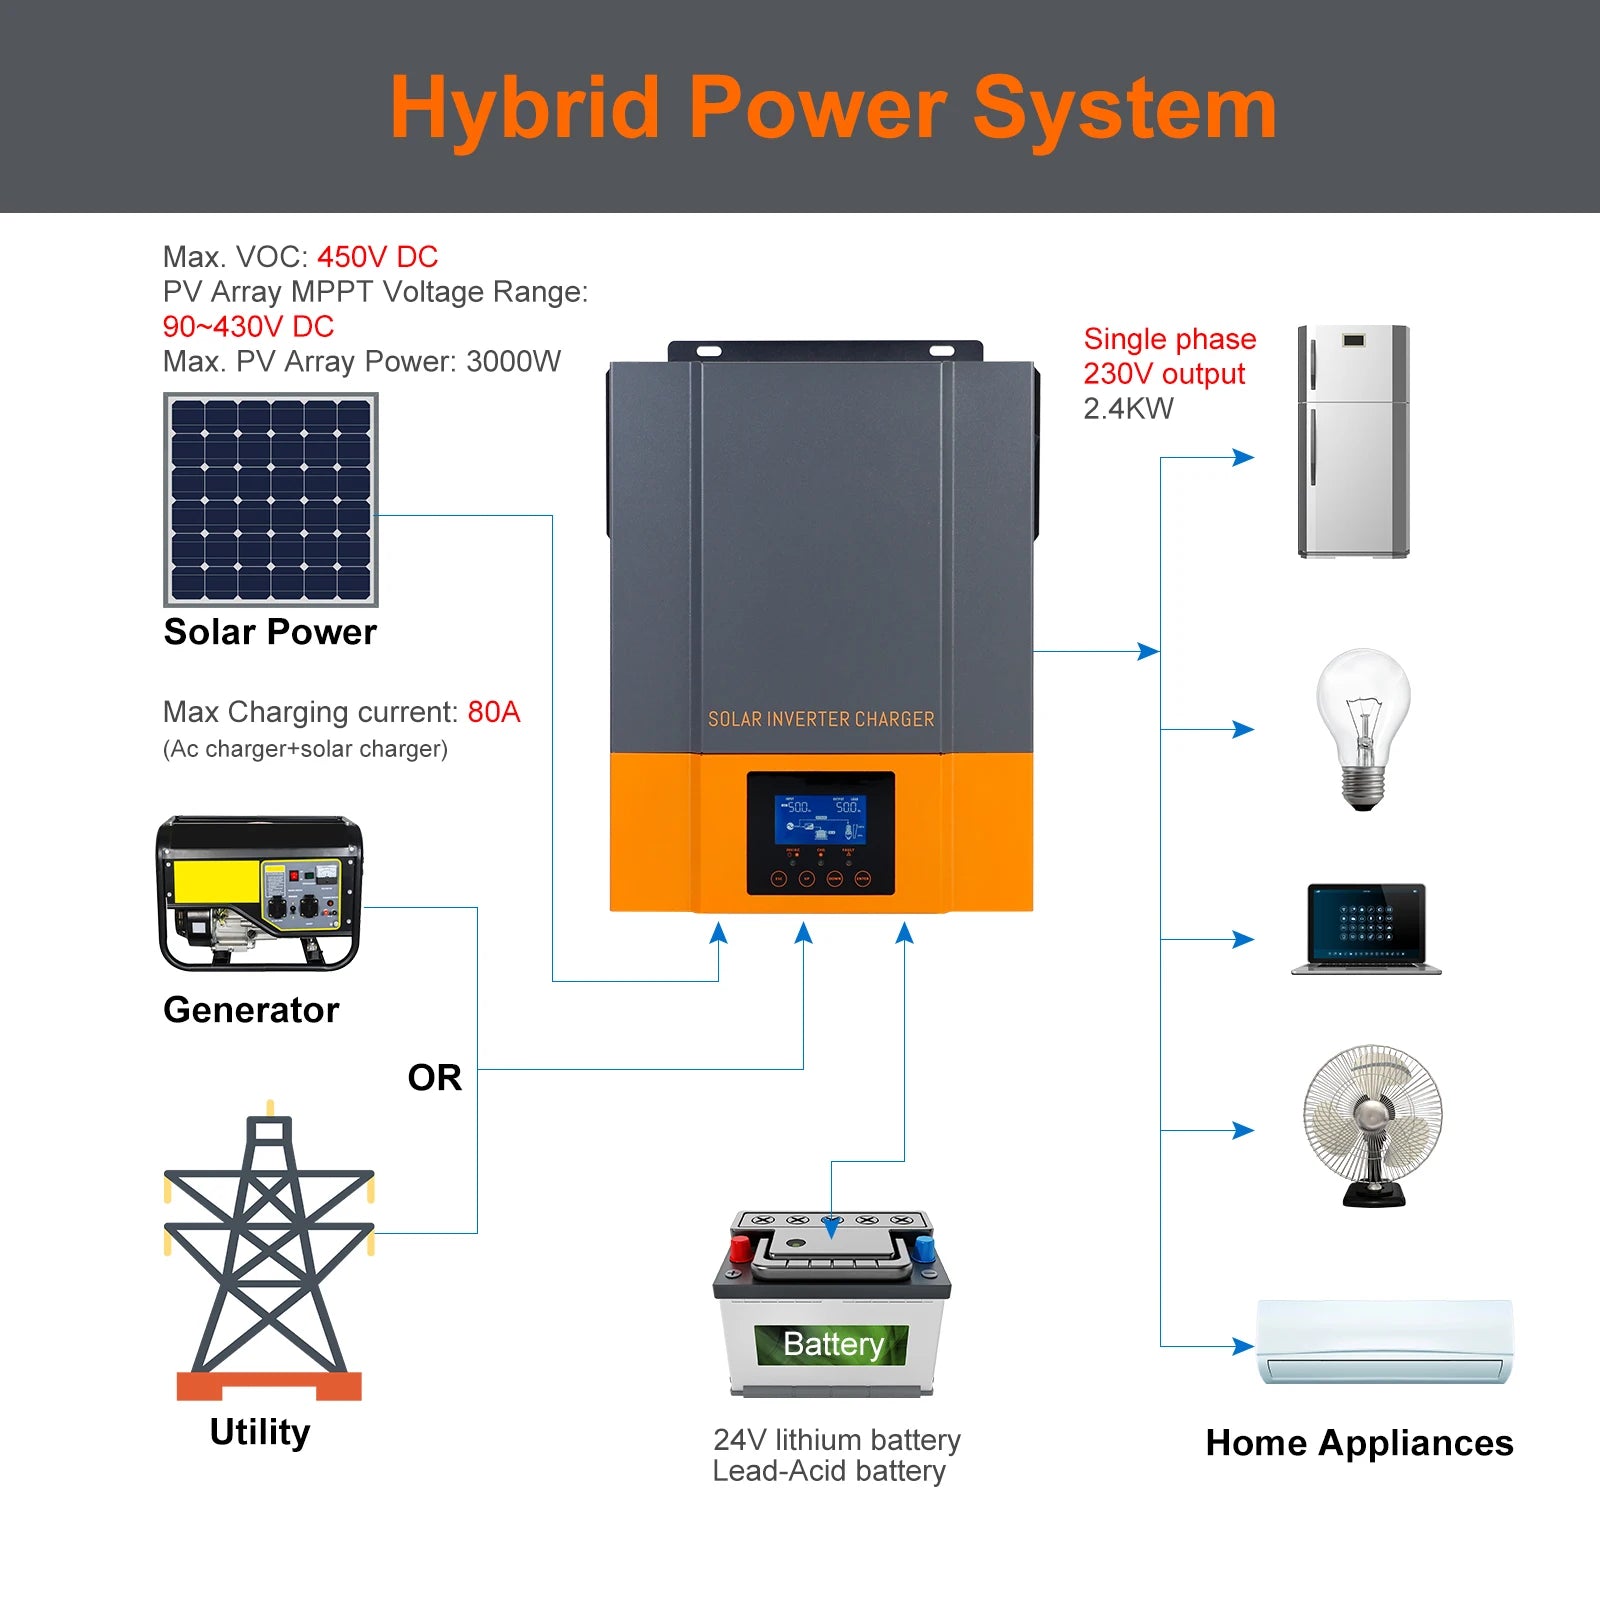 MPPT Solar Charger with Wi-Fi monitoring for hybrid power systems, battery charging, and appliance powering.